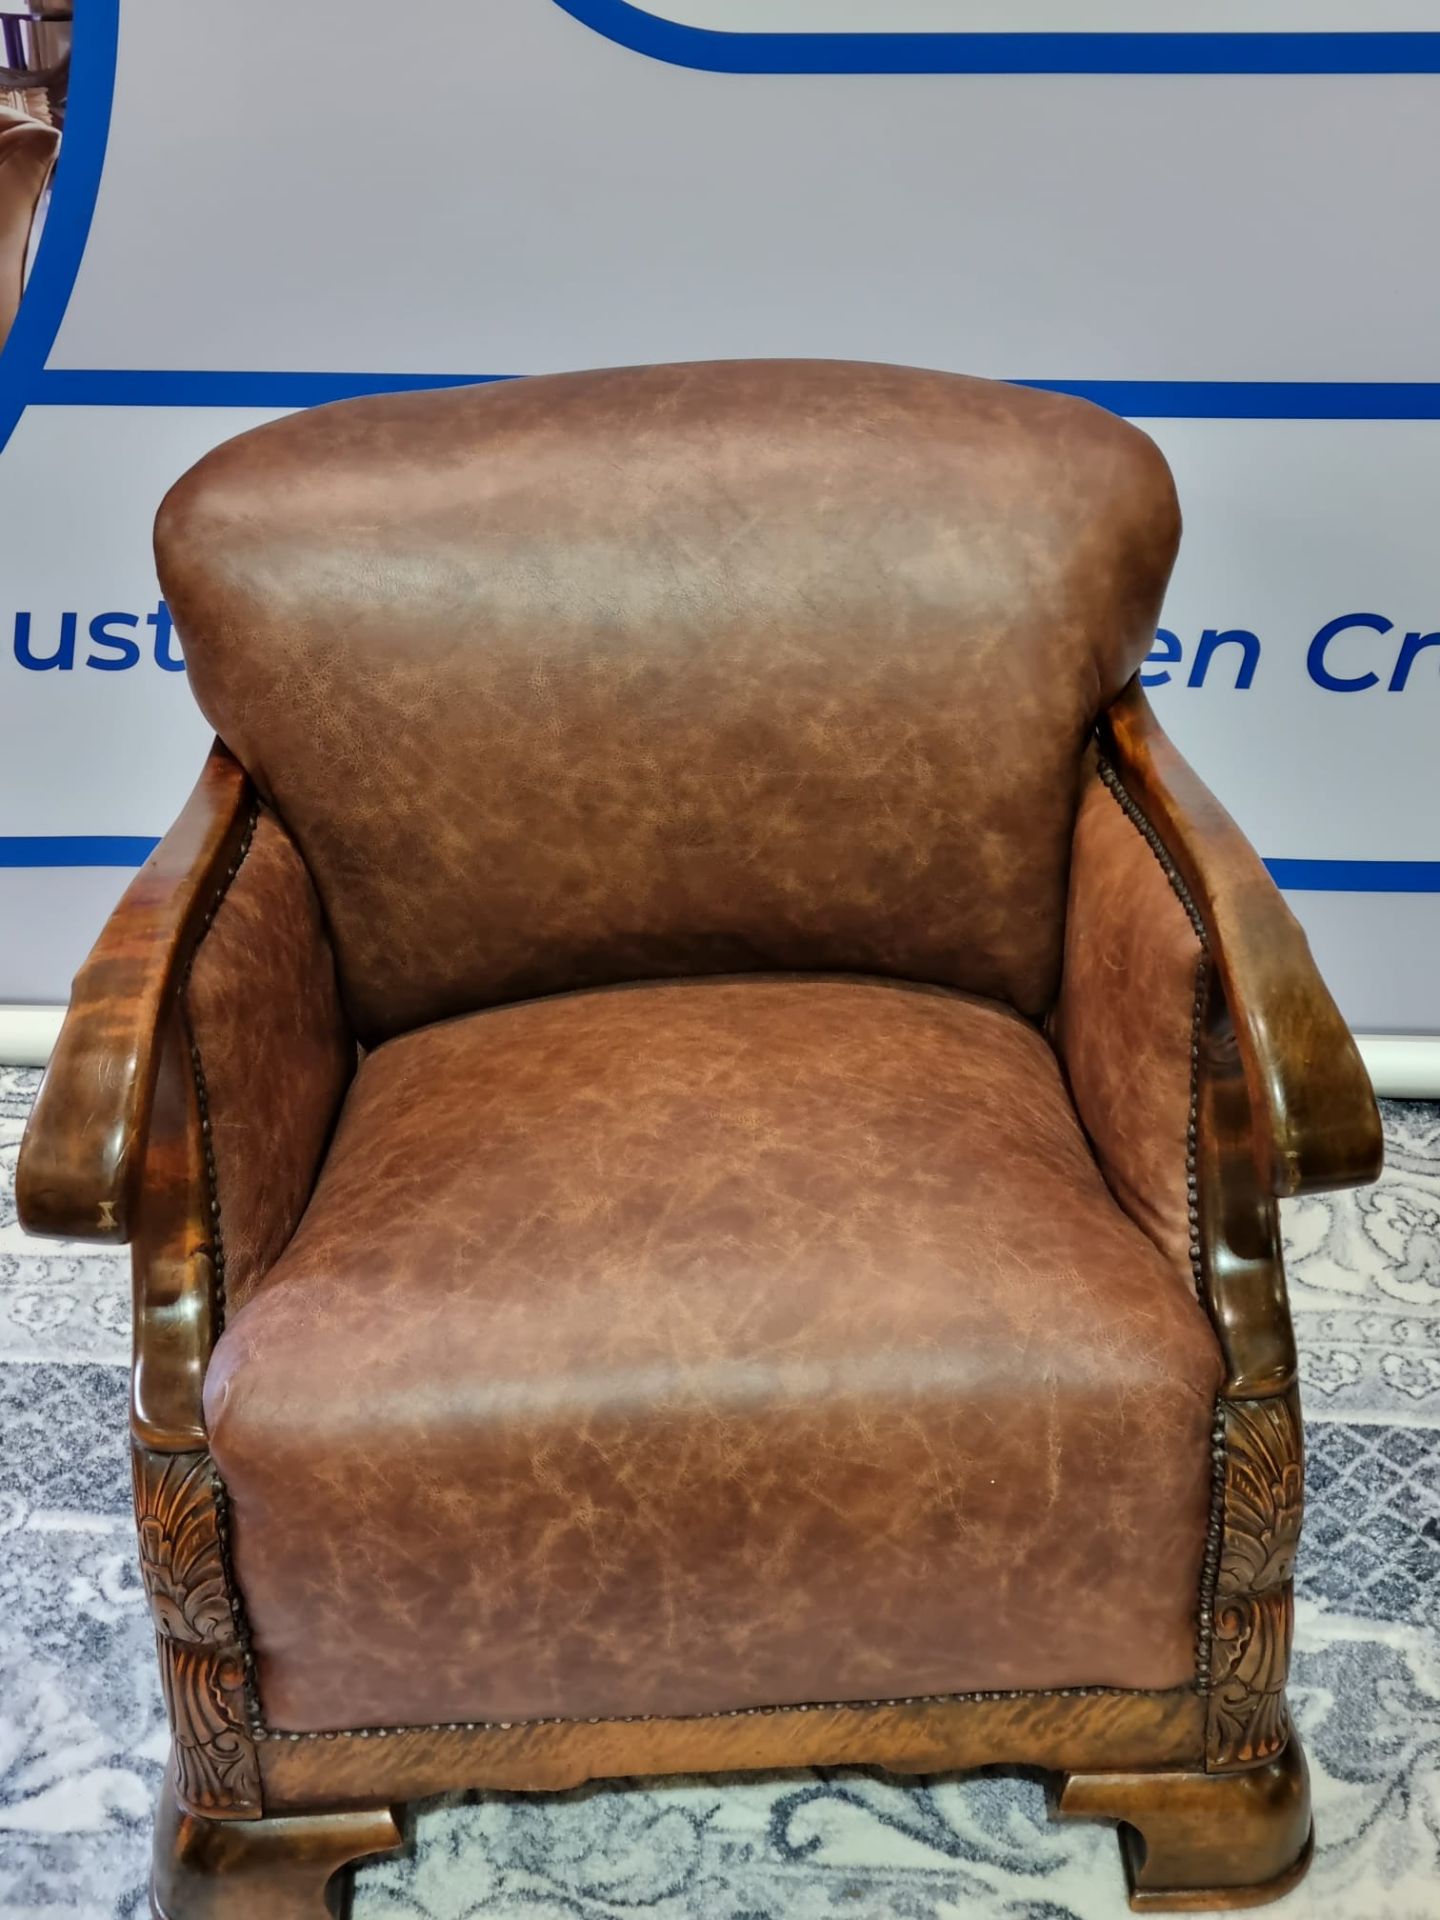 Leather Armchair Continental Oak Frame With Recently Upholstered Vintage 100% Leather Upholstery - Image 10 of 13